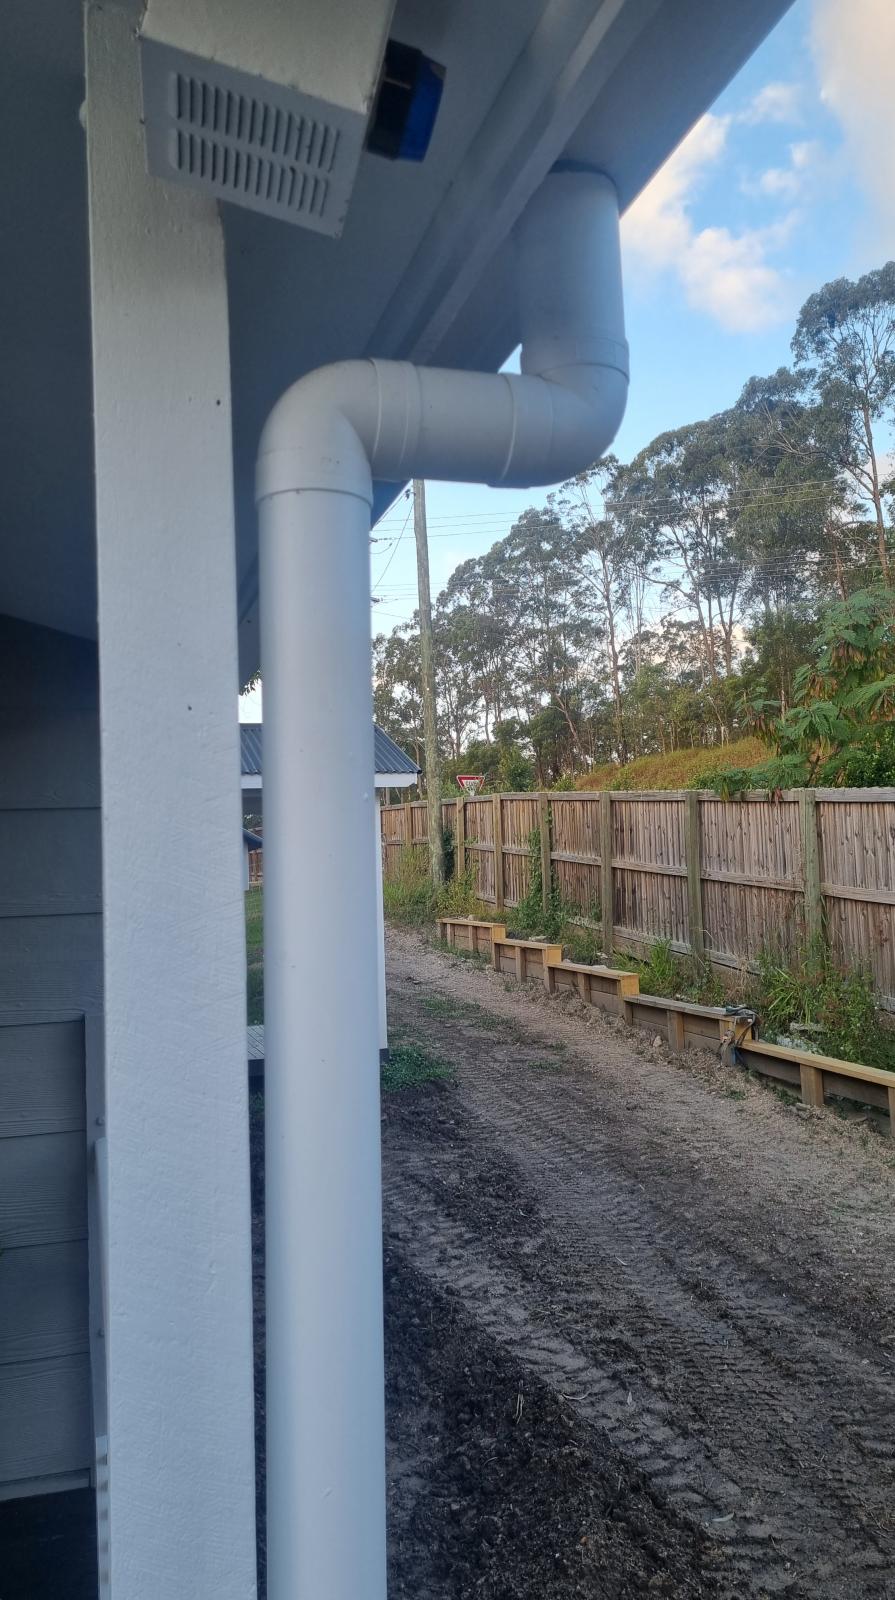 Downspouts and Subsurface pipe sizes